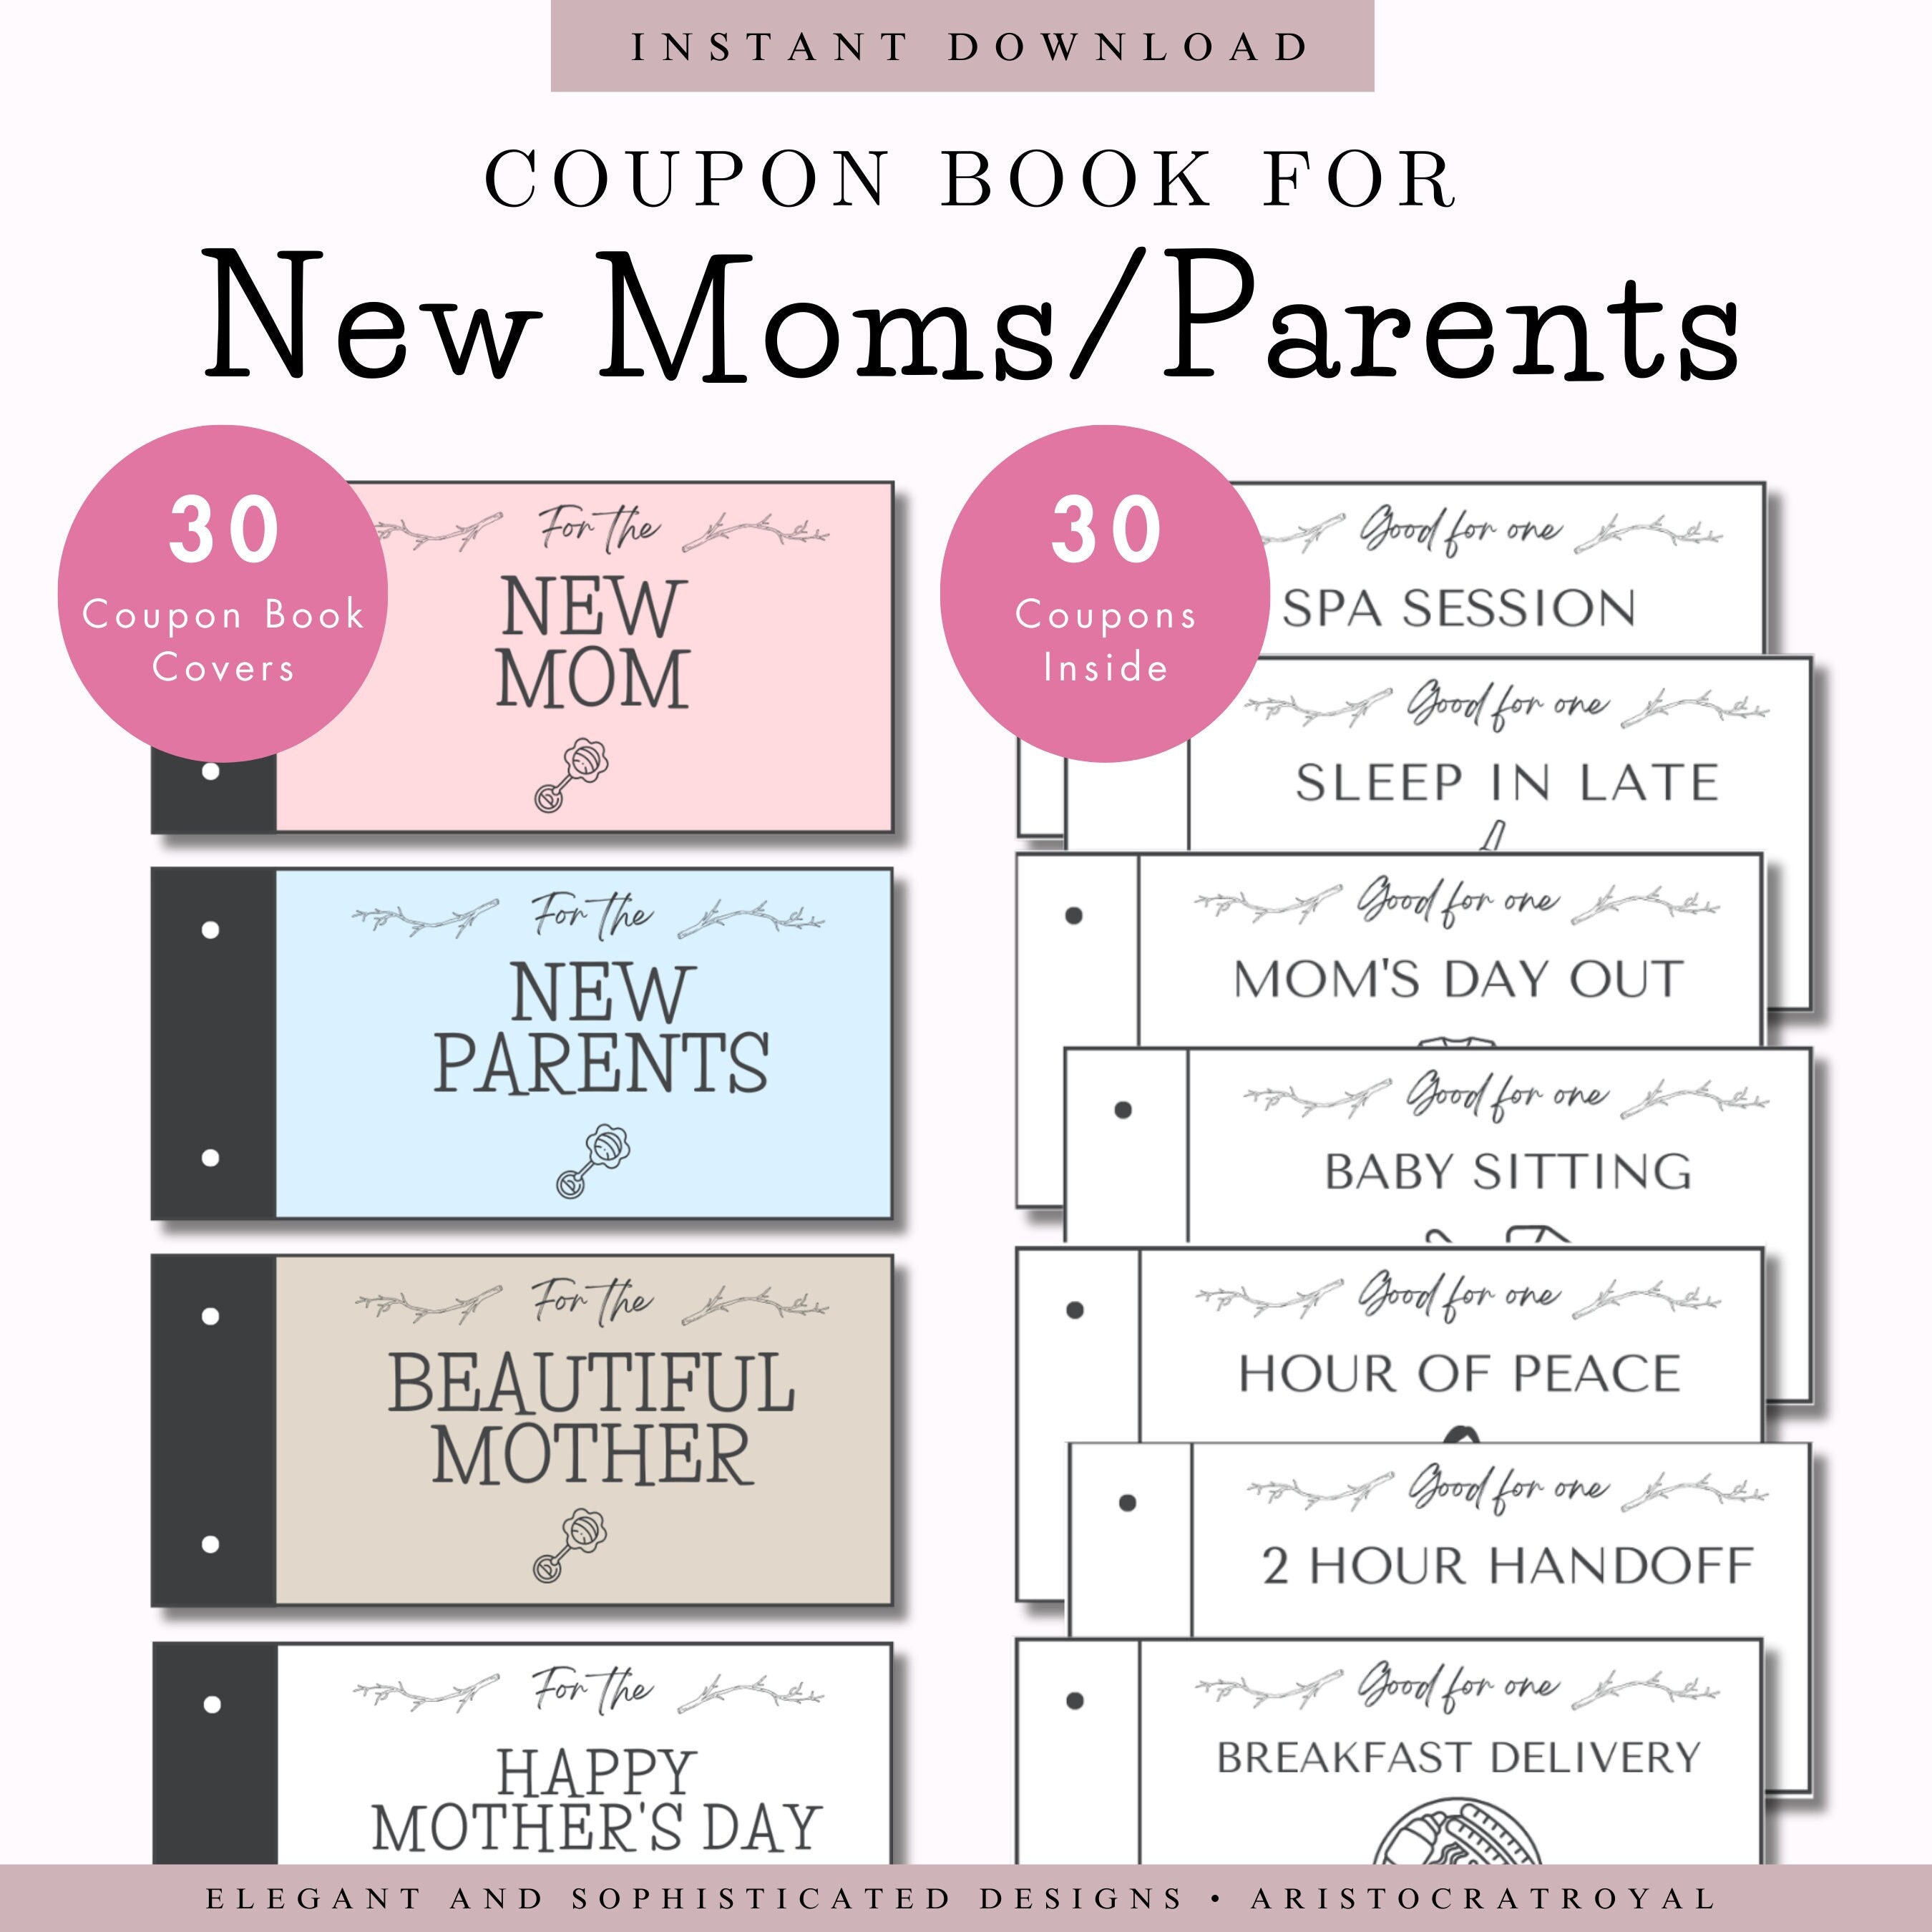 Gifts for New Parents — 20 Ways to Make New Moms and Dads Feel